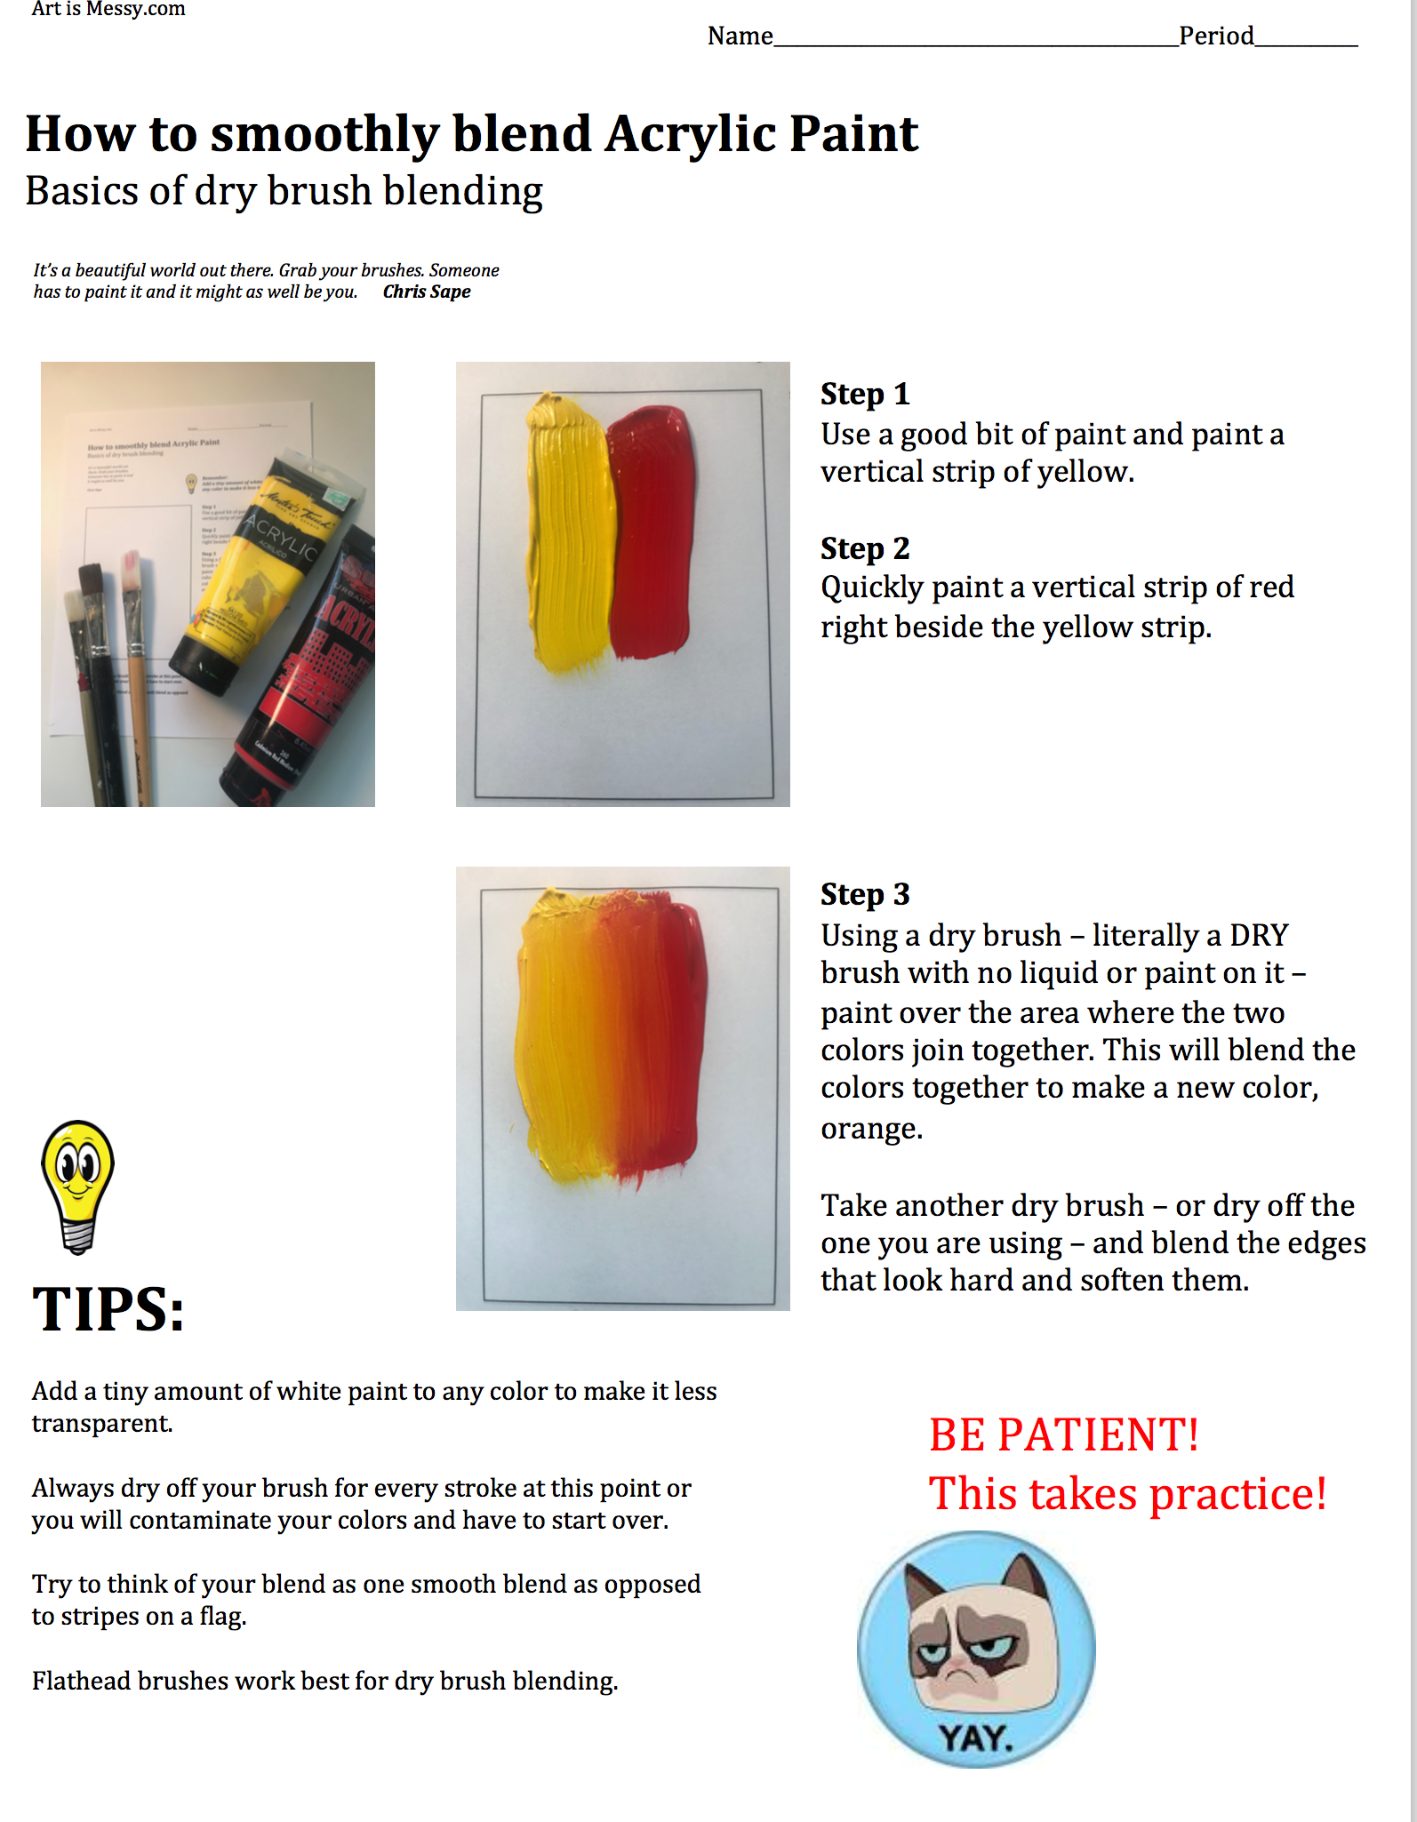 Worksheet: How to blend Acrylic Paint - Art Lesson Plans